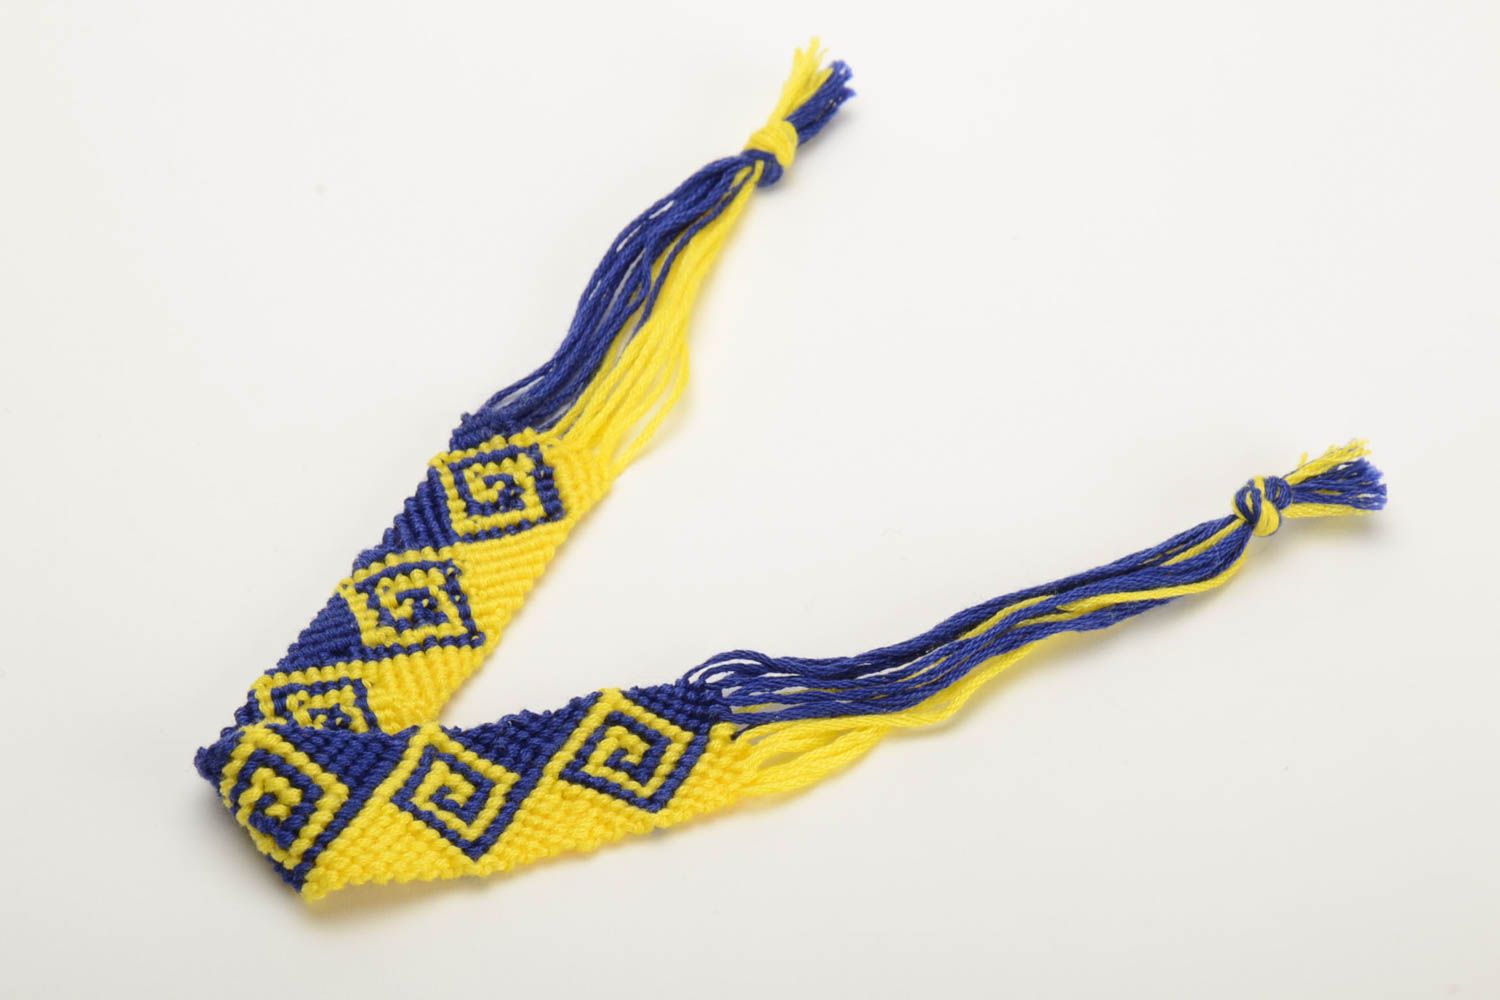 Handmade wide friendship wrist bracelet woven of yellow and blue embroidery floss photo 4